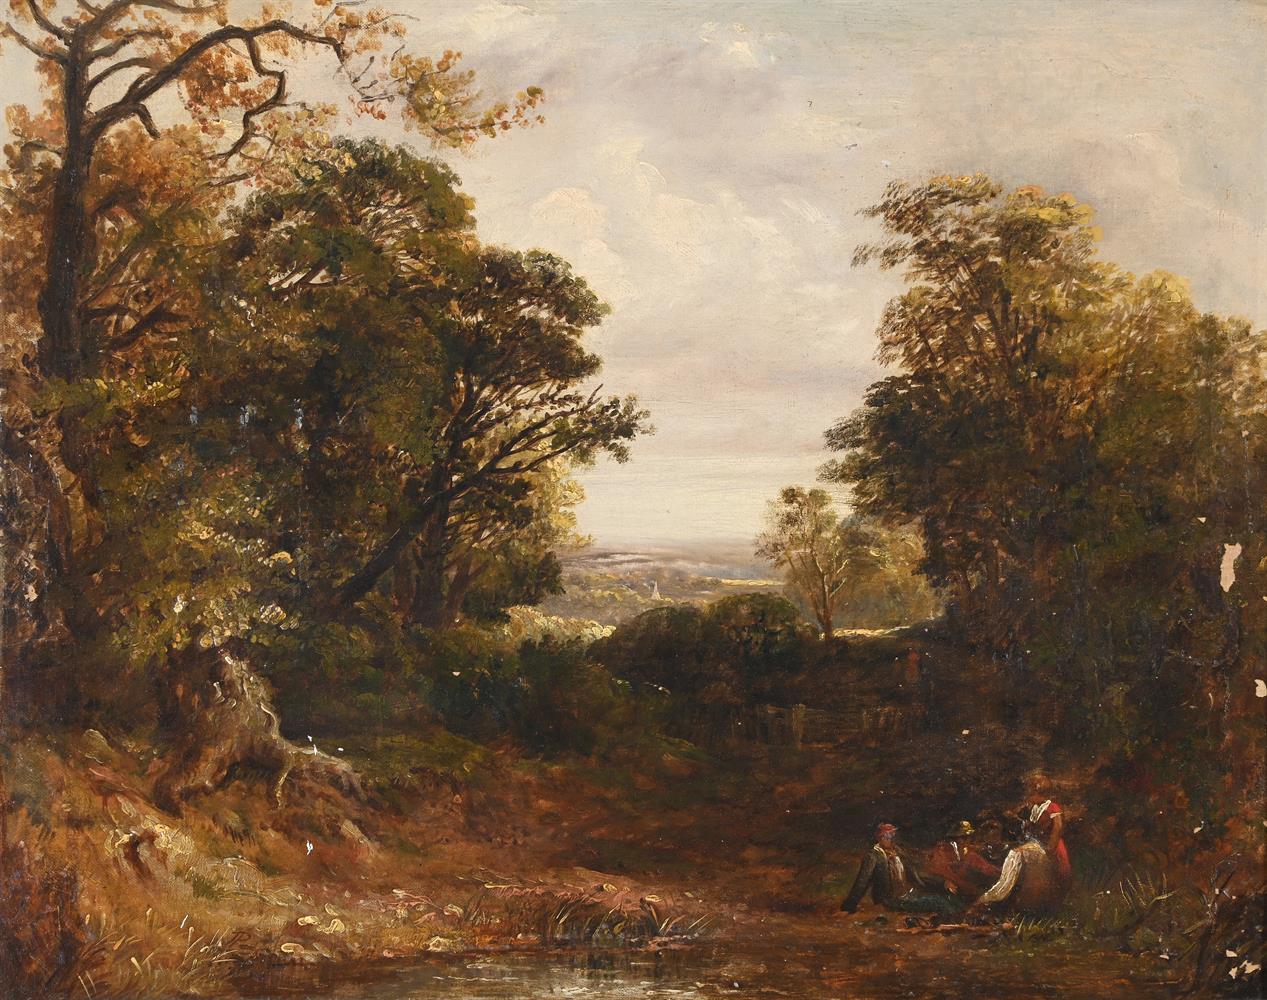 ENGLISH SCHOOL (19TH CENTURY), FIGURES RESTING IN A LANDSCAPE - Image 2 of 3